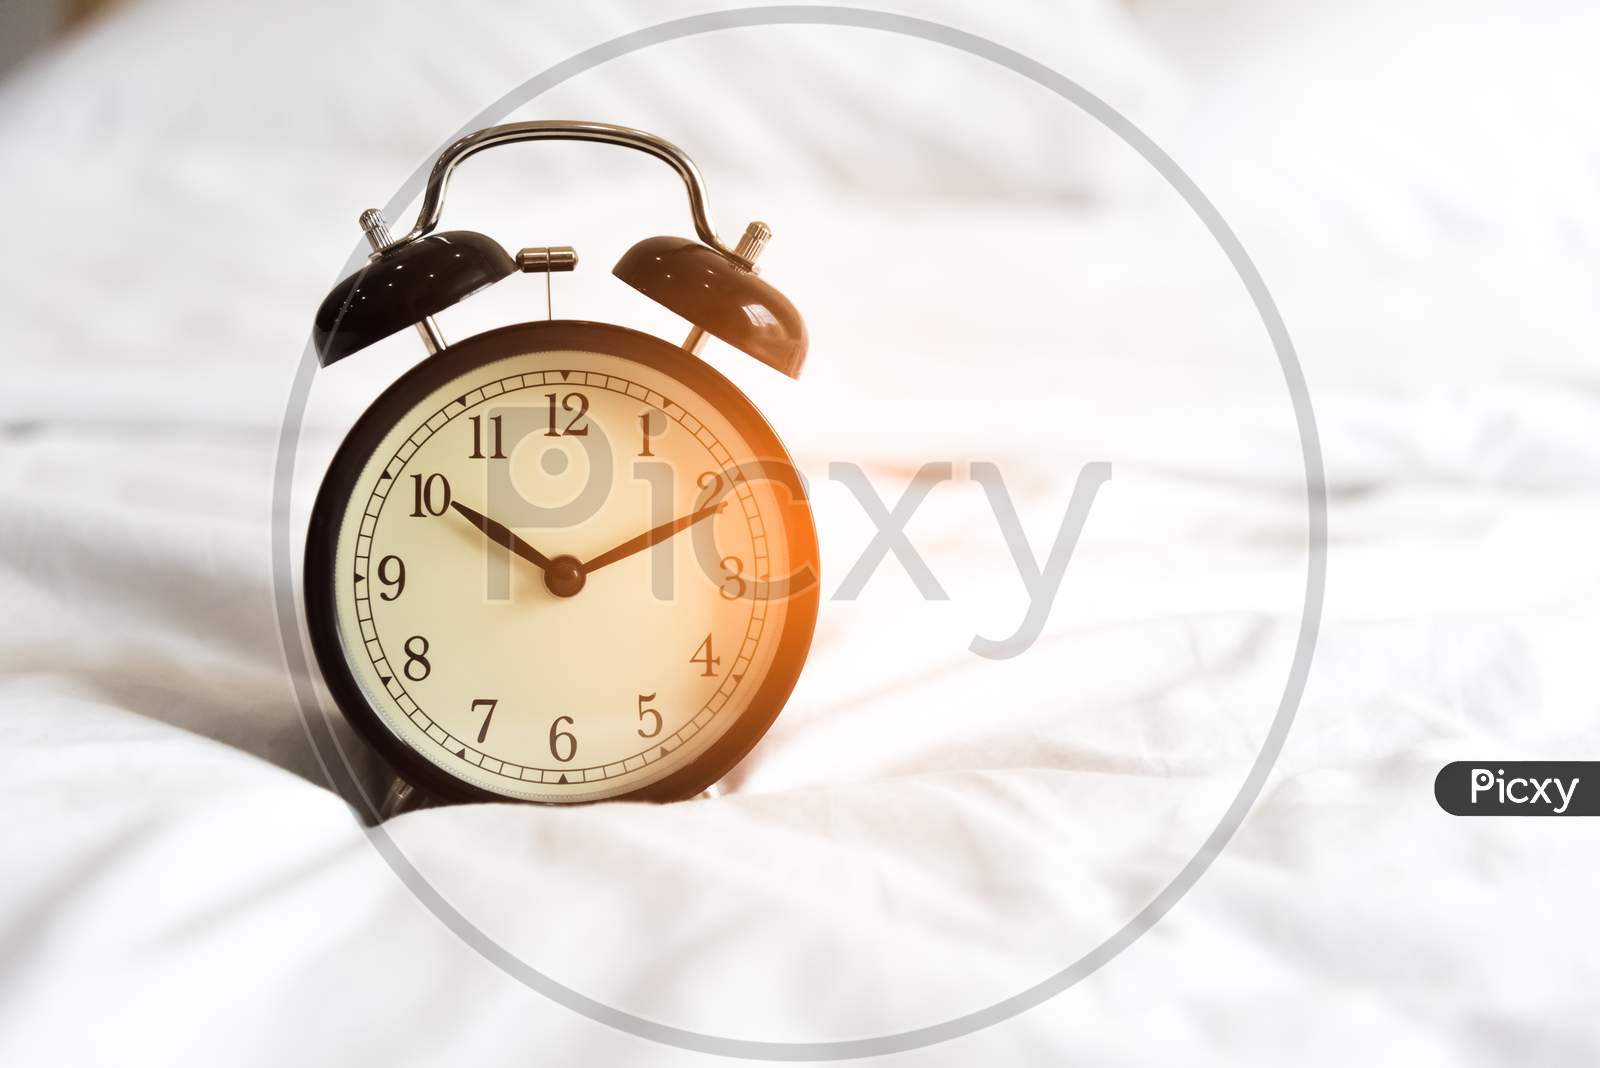 Alarm Clock On The White Bed. Holiday And Reminder Concept. Clock Hand Point To 10 O'Clock 10 Minute Time